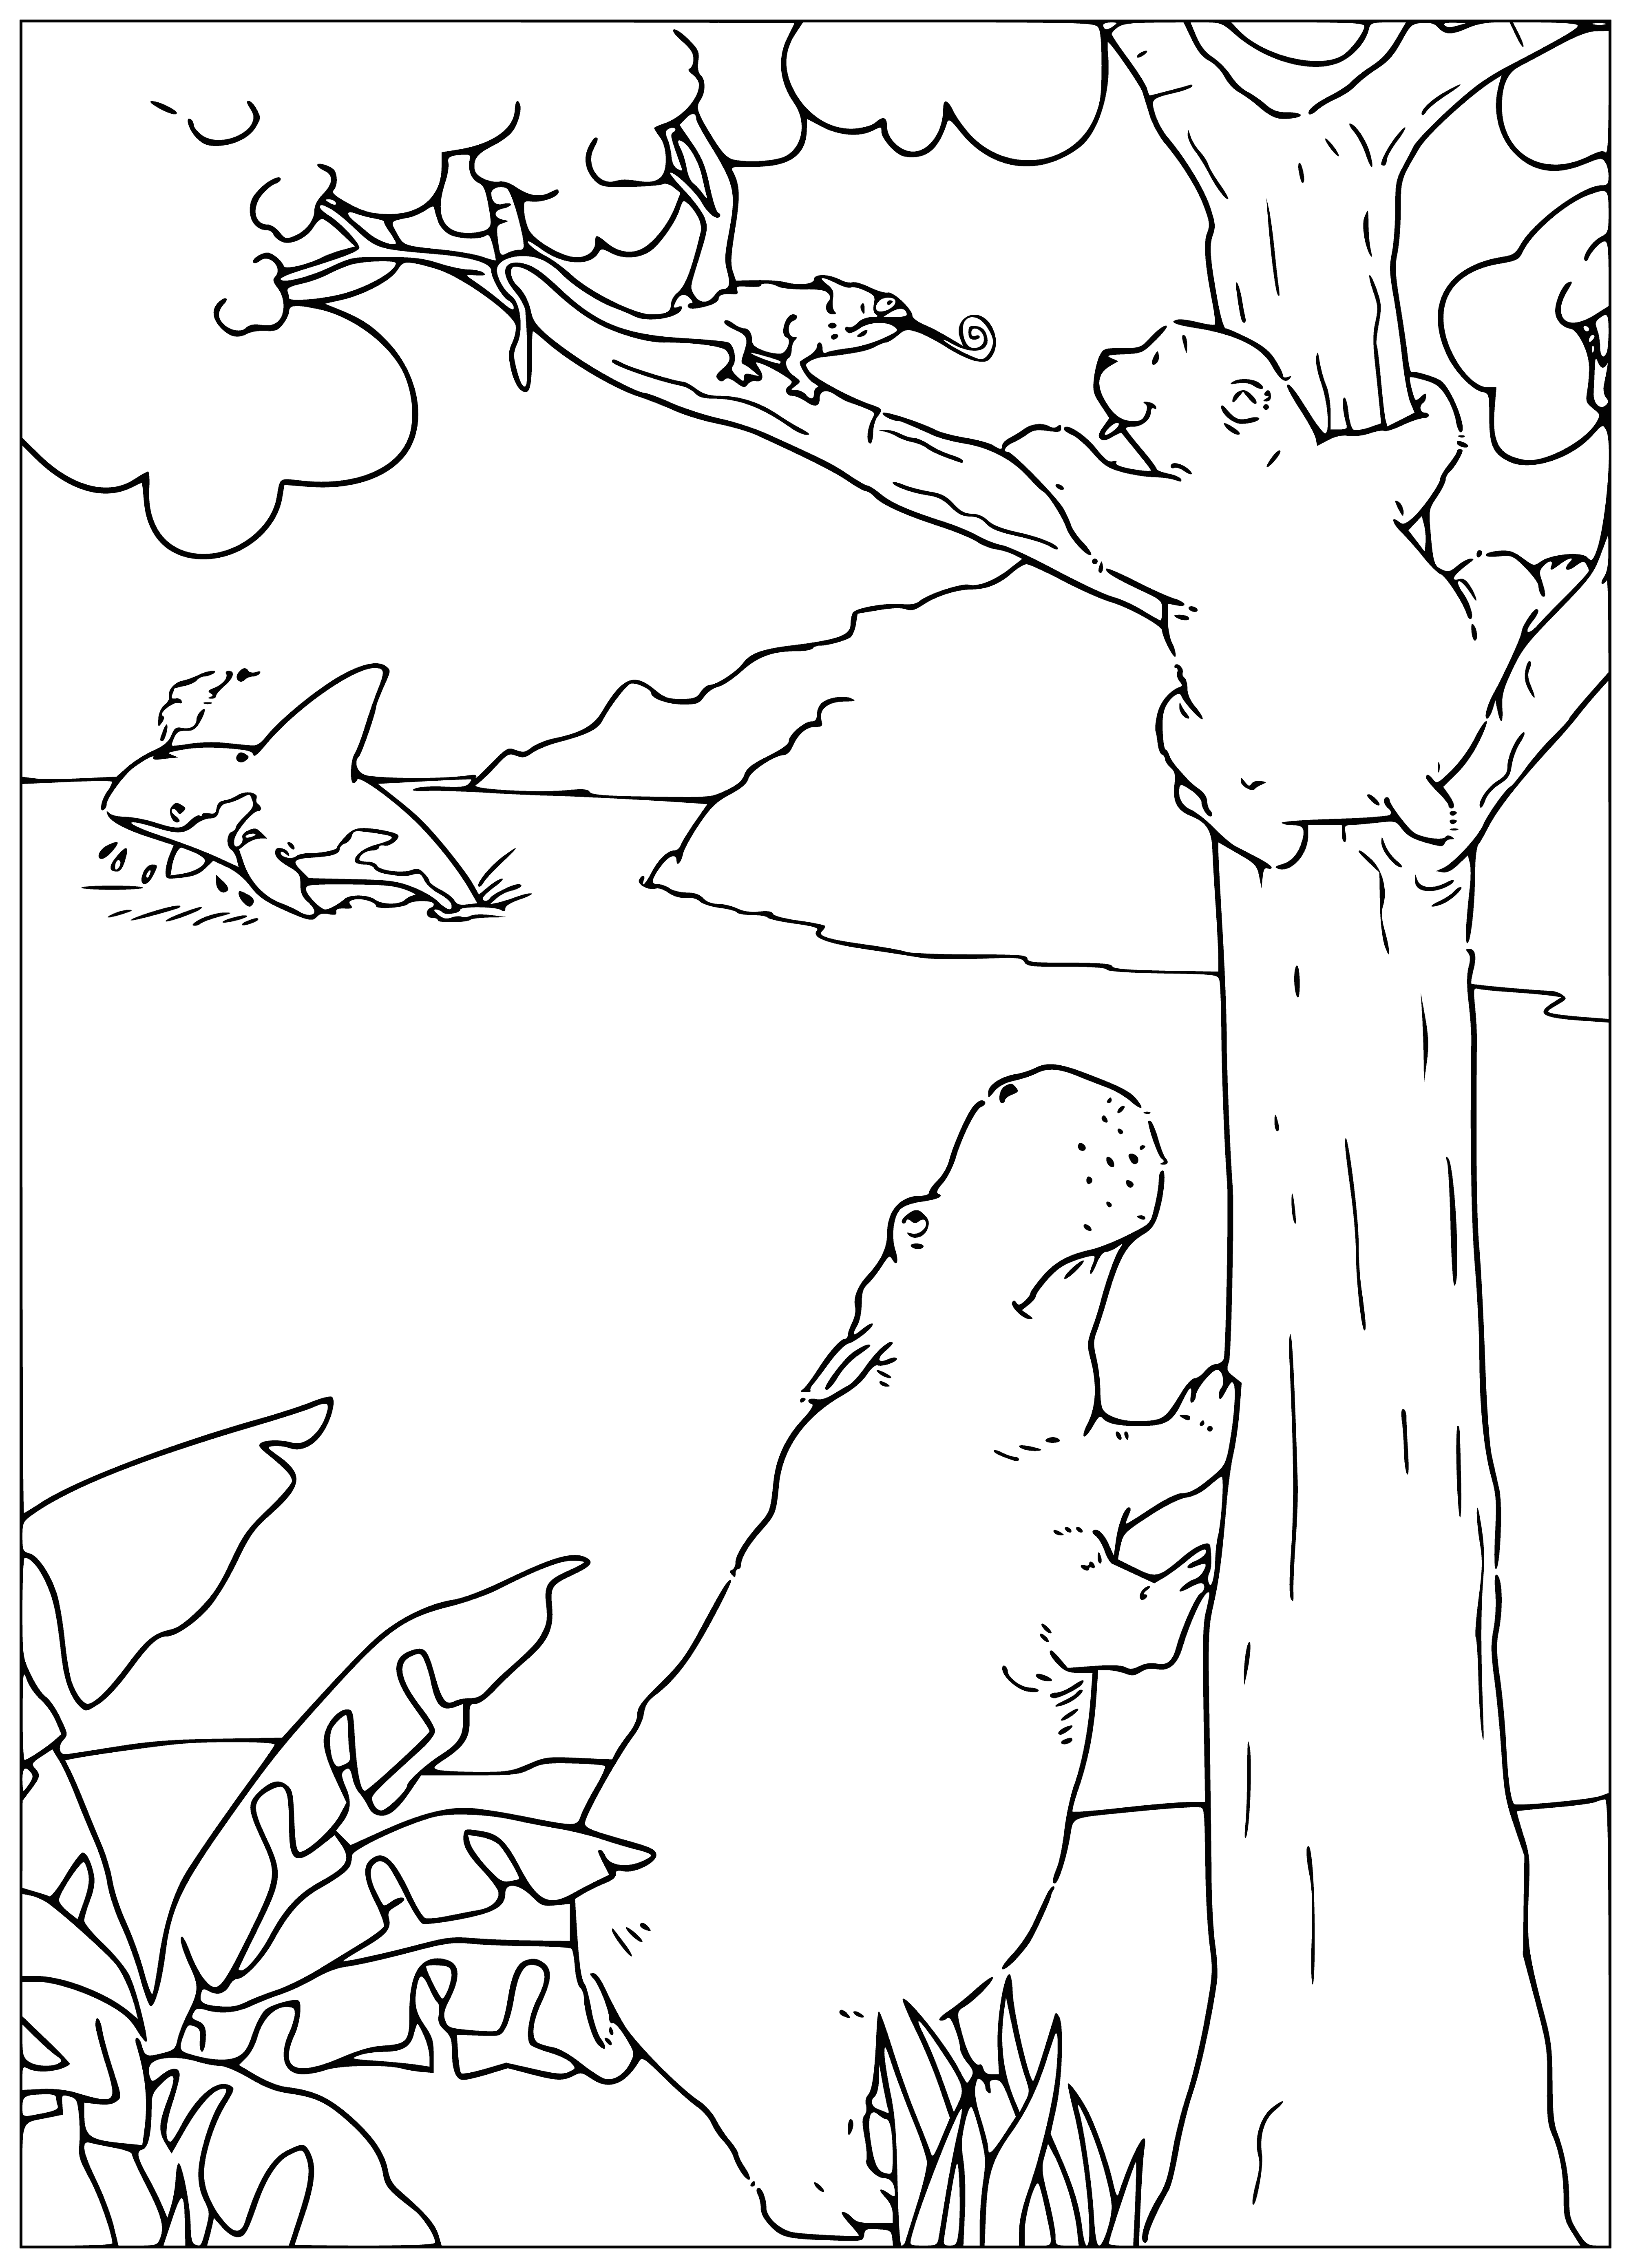 Lars on a tree coloring page